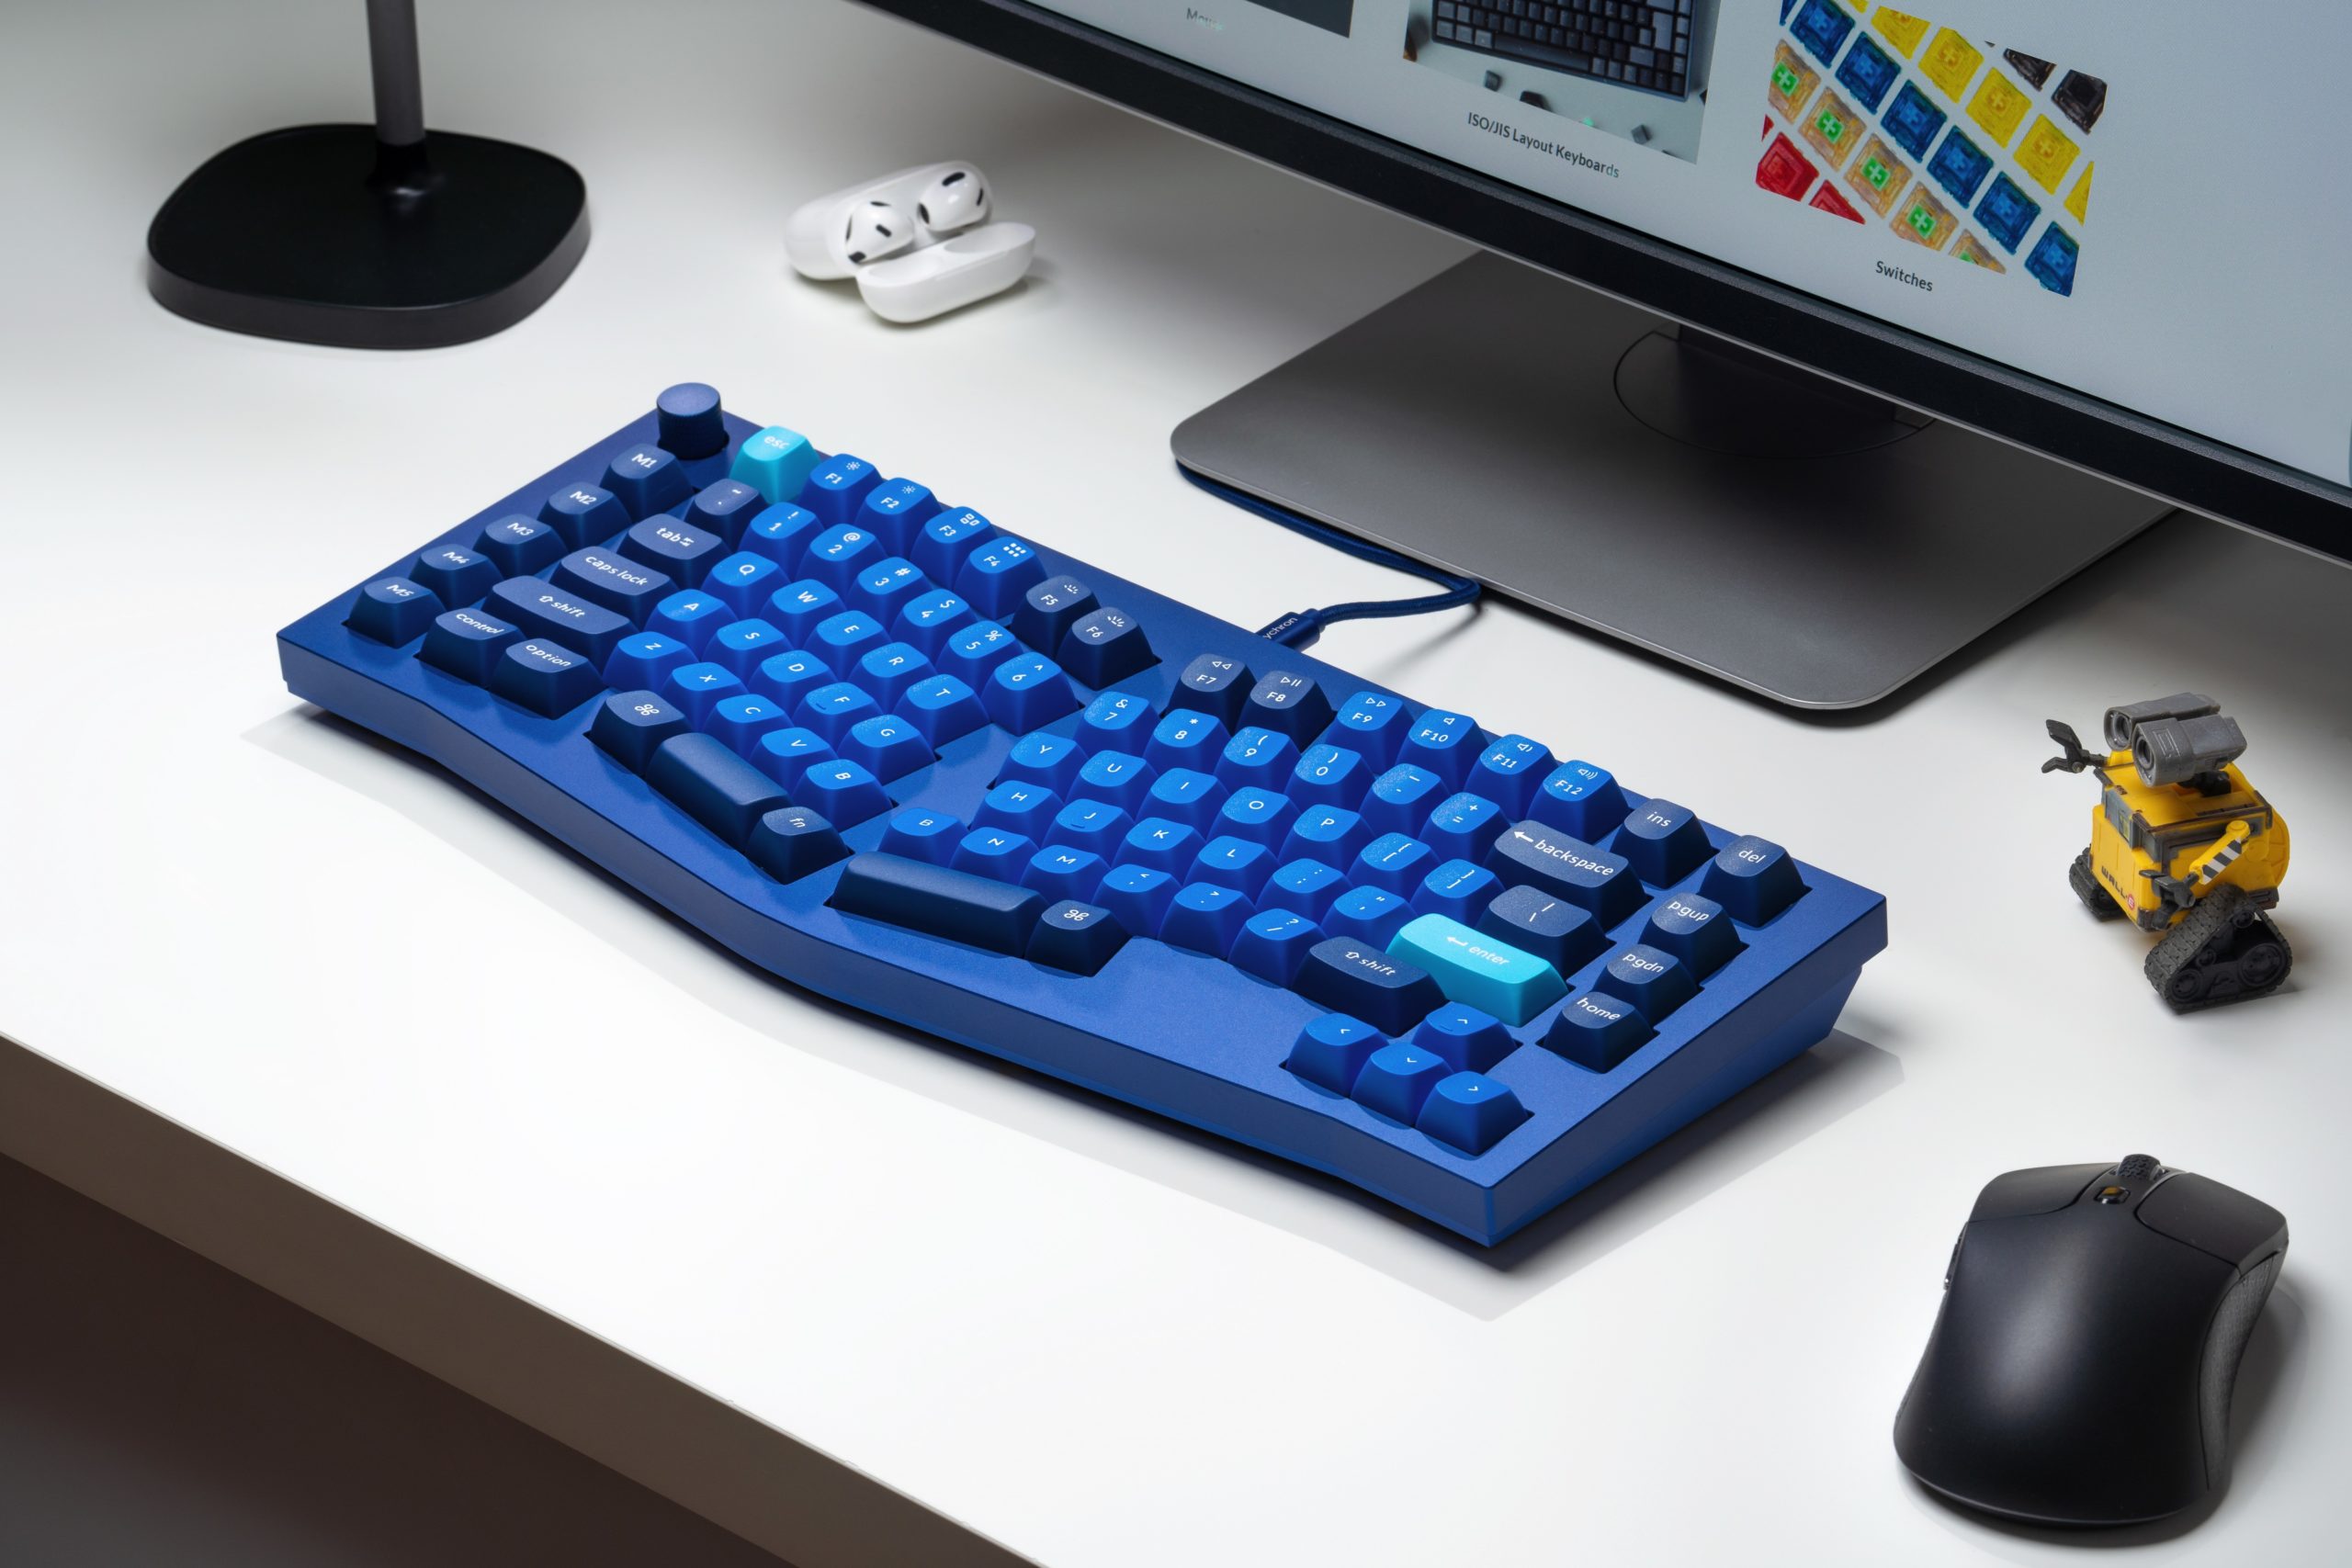 Review: The Keychron Q10 is a Luxury Mechanical Keyboard with Knobs On